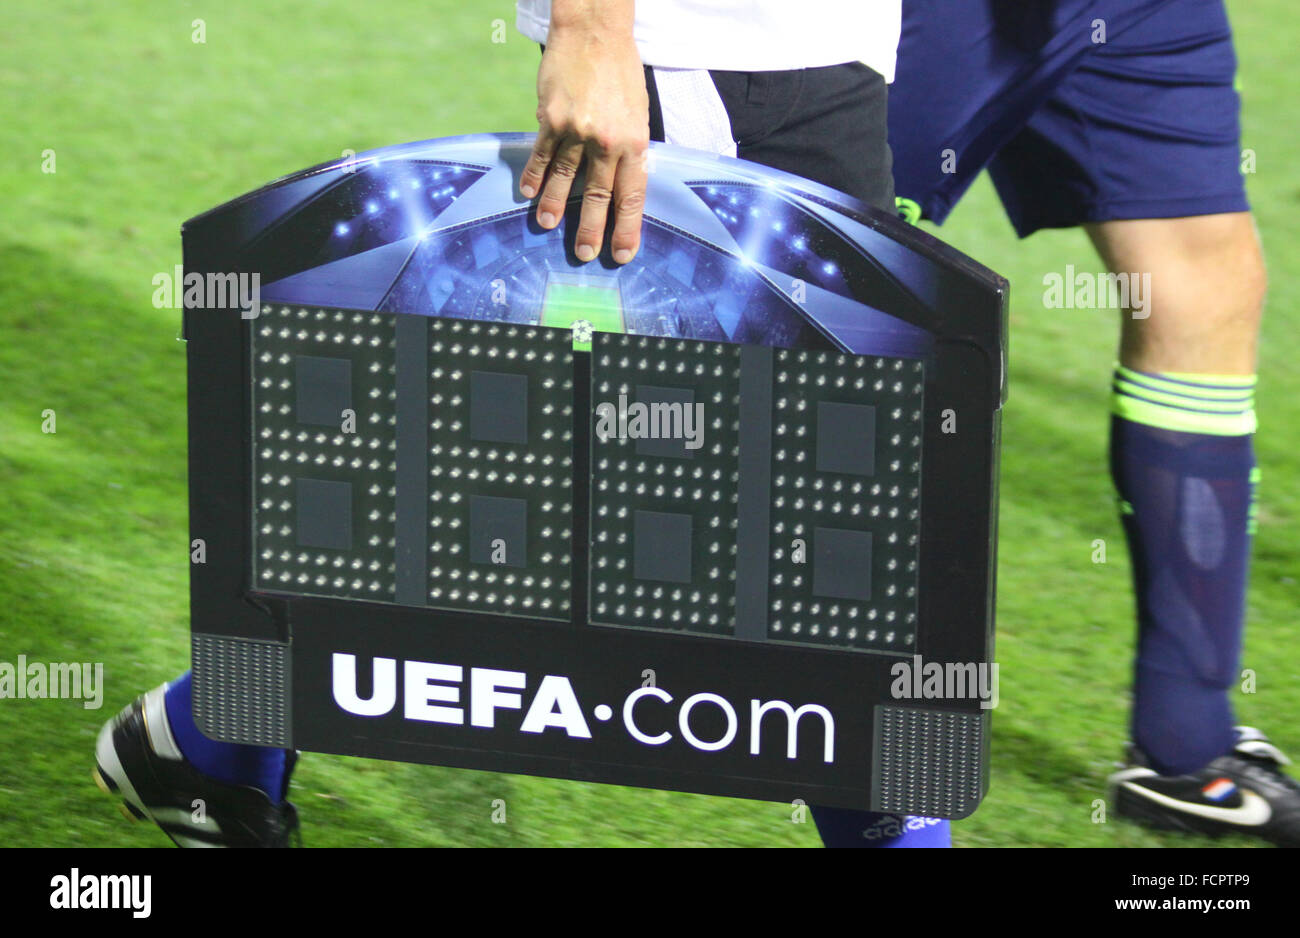 Referee takes an indicator board during UEFA Champions League game Stock Photo